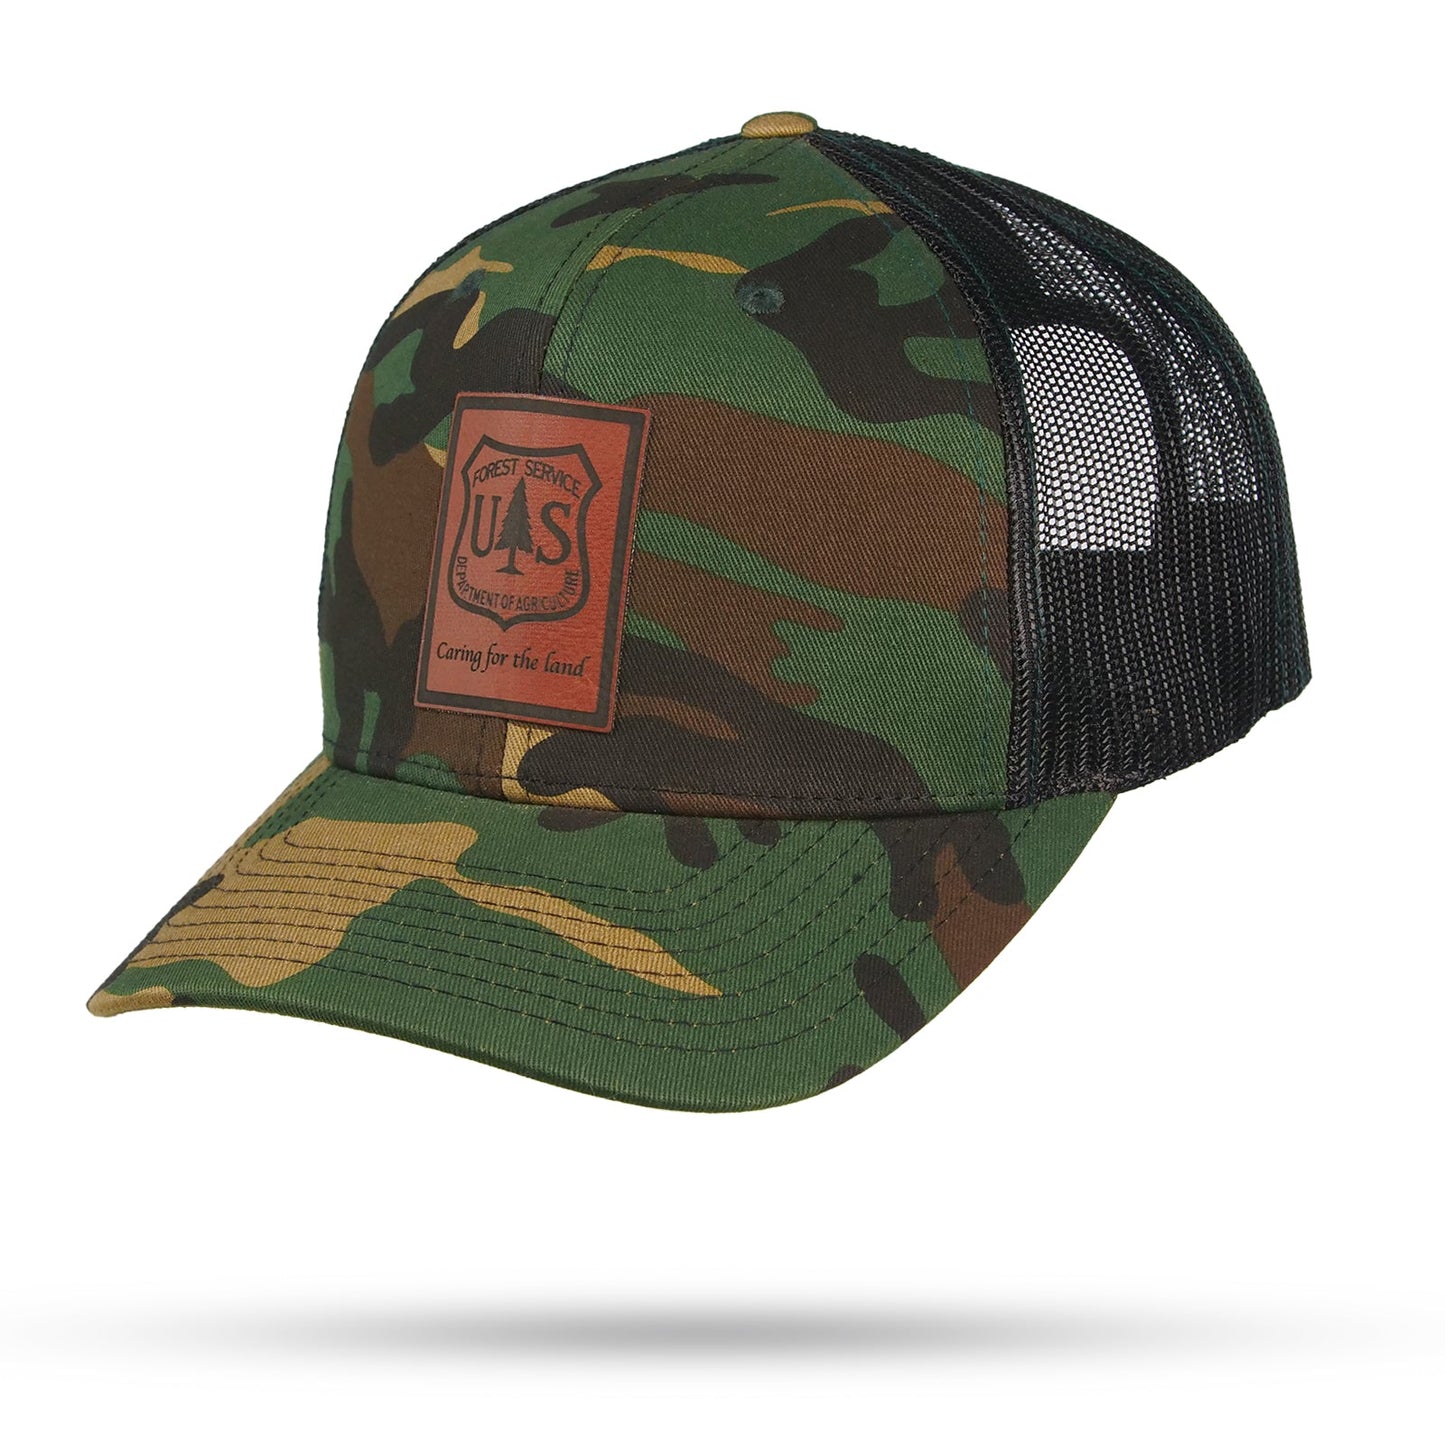 USFS Leather Patch Trucker Snapback - Care for The Land | Authentic Gear Charcoal/Black w/ Grey Patch